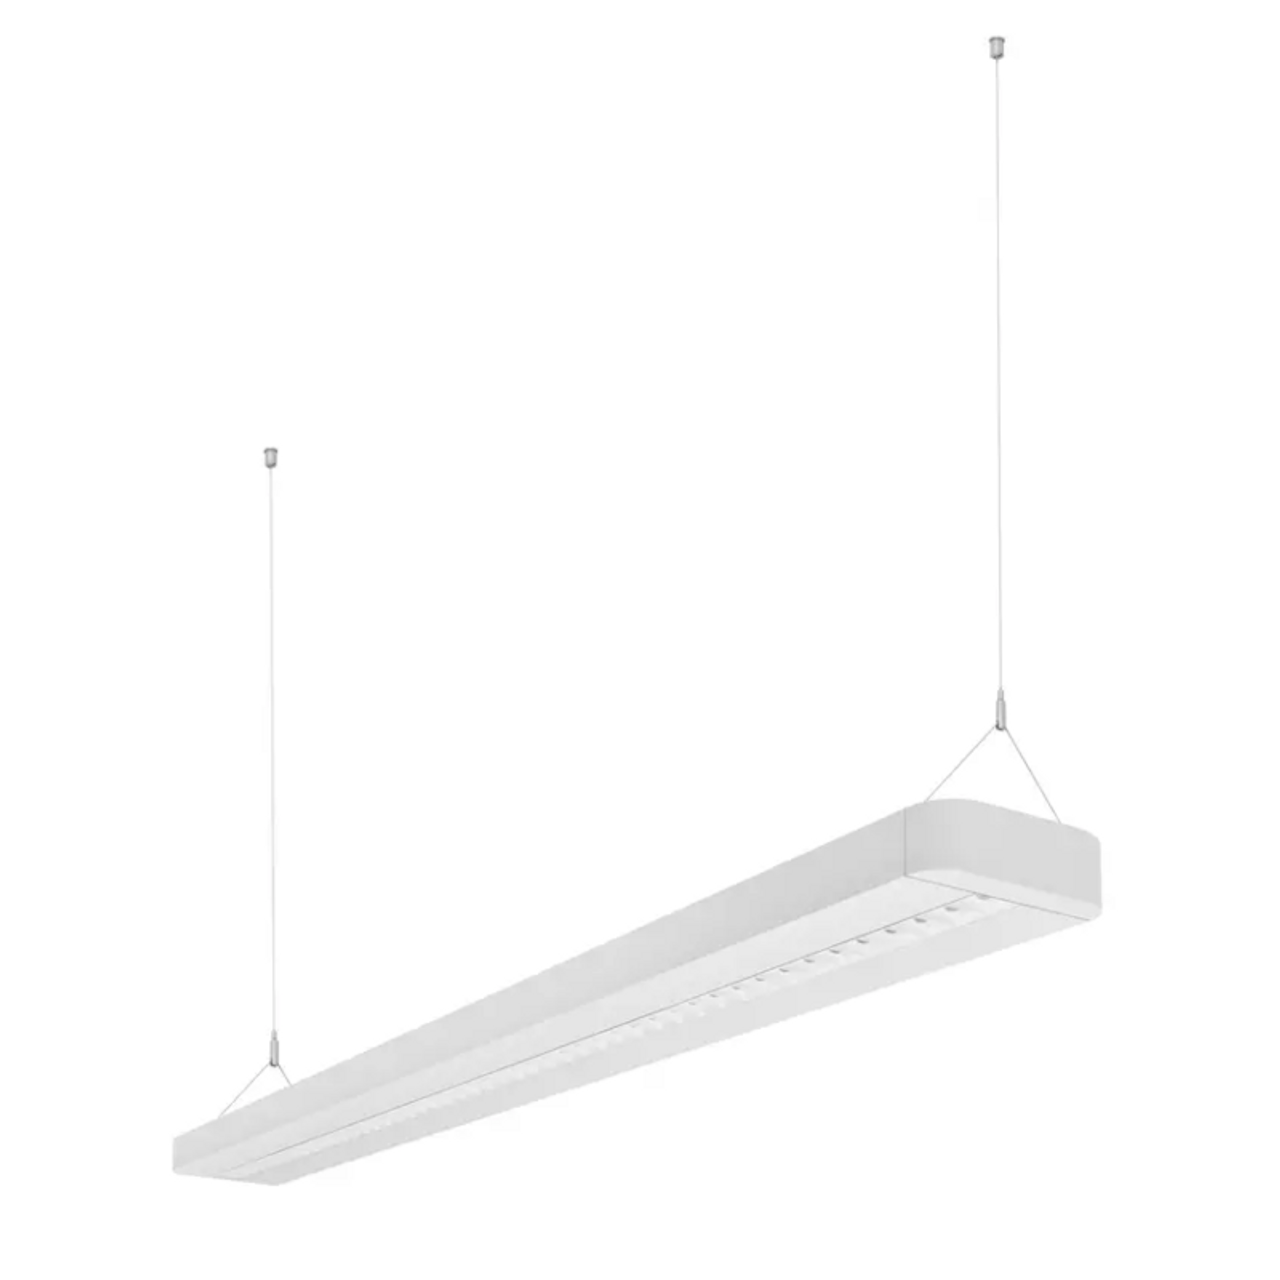 LED Linear Indiviled Direct/Indirect 1200mm 42W 5050lm 4000K White Emergency